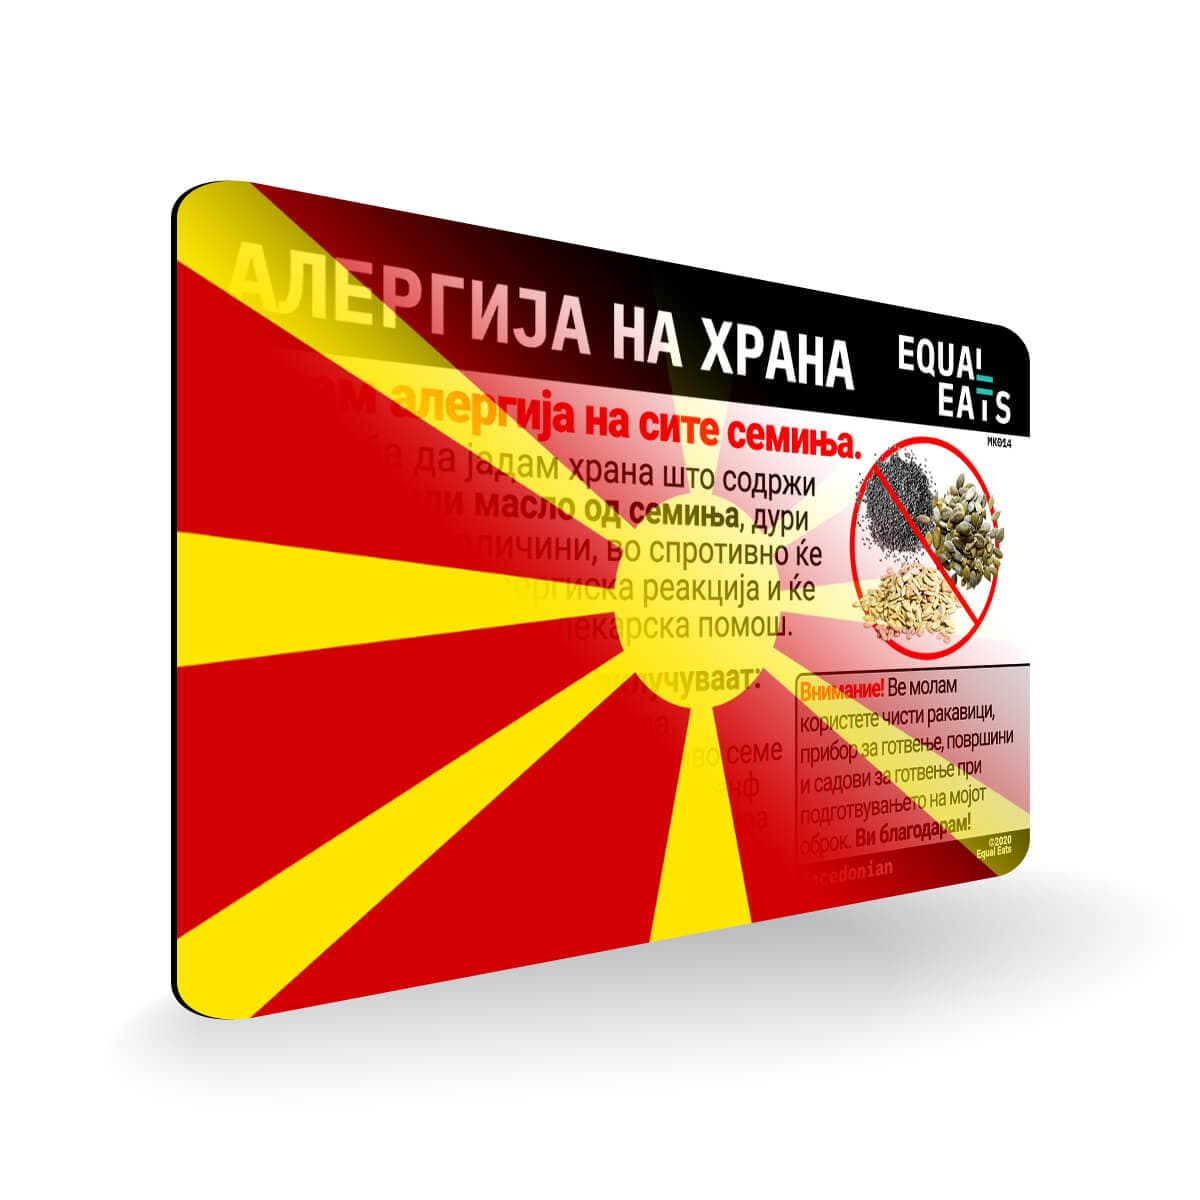 Seed Allergy in Macedonian. Seed Allergy Card for Macedonia